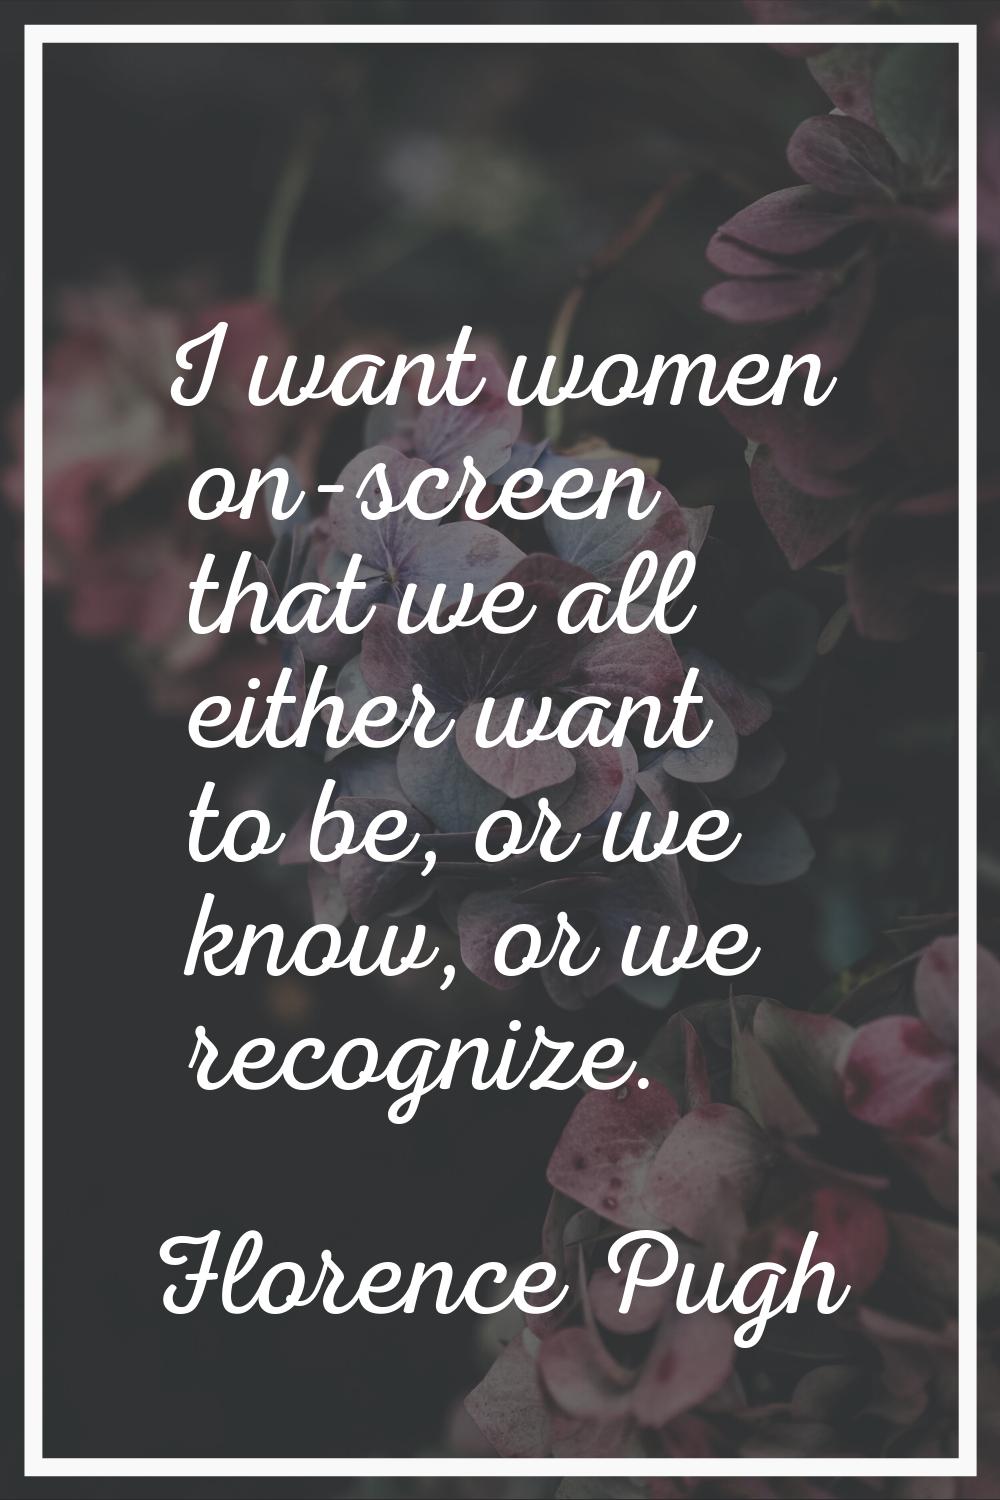 I want women on-screen that we all either want to be, or we know, or we recognize.